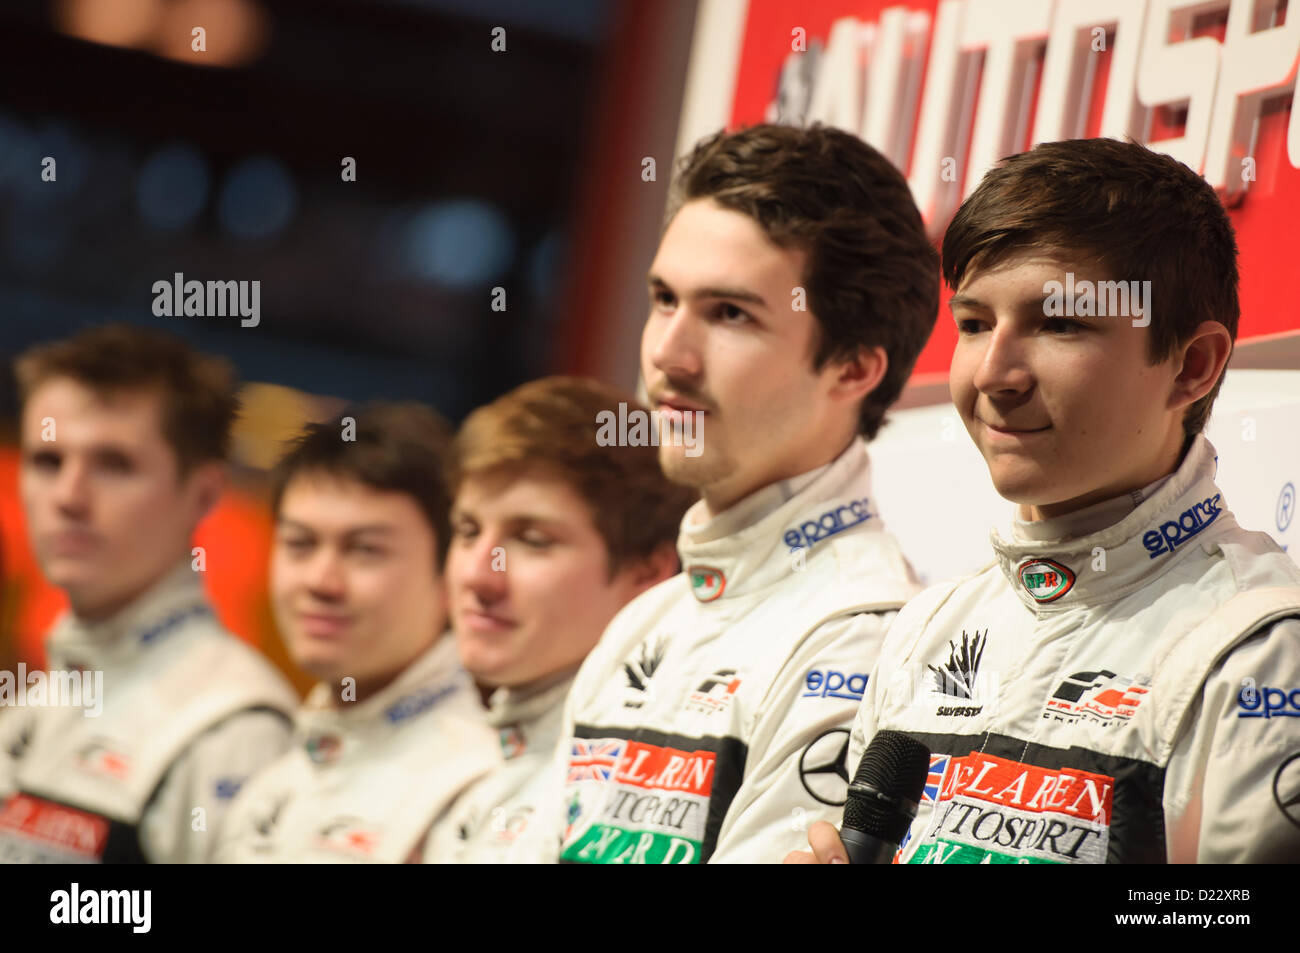 Birmingham NEC, UK, 12th January 2013.  Five of the McLaren Autosport BRDC Award finalists at Autosport International.  The drivers from right to left are award winner Jake Dennis, Josh Hill (son of Damon Hill), Jordan King, Melville McKee and Josh Webster. Stock Photo